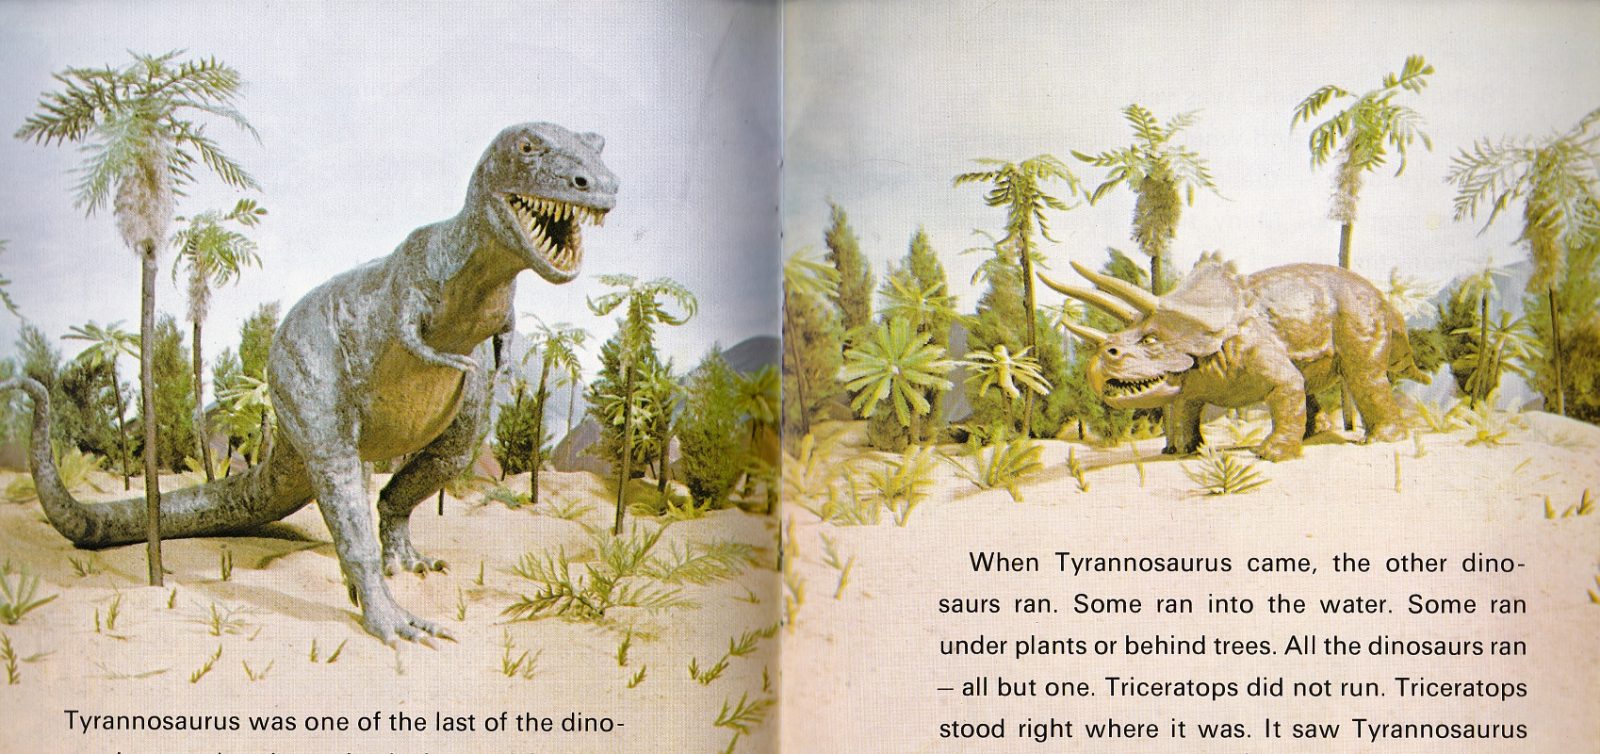 T. rex and Triceratops in Speaking of Dinosaurs